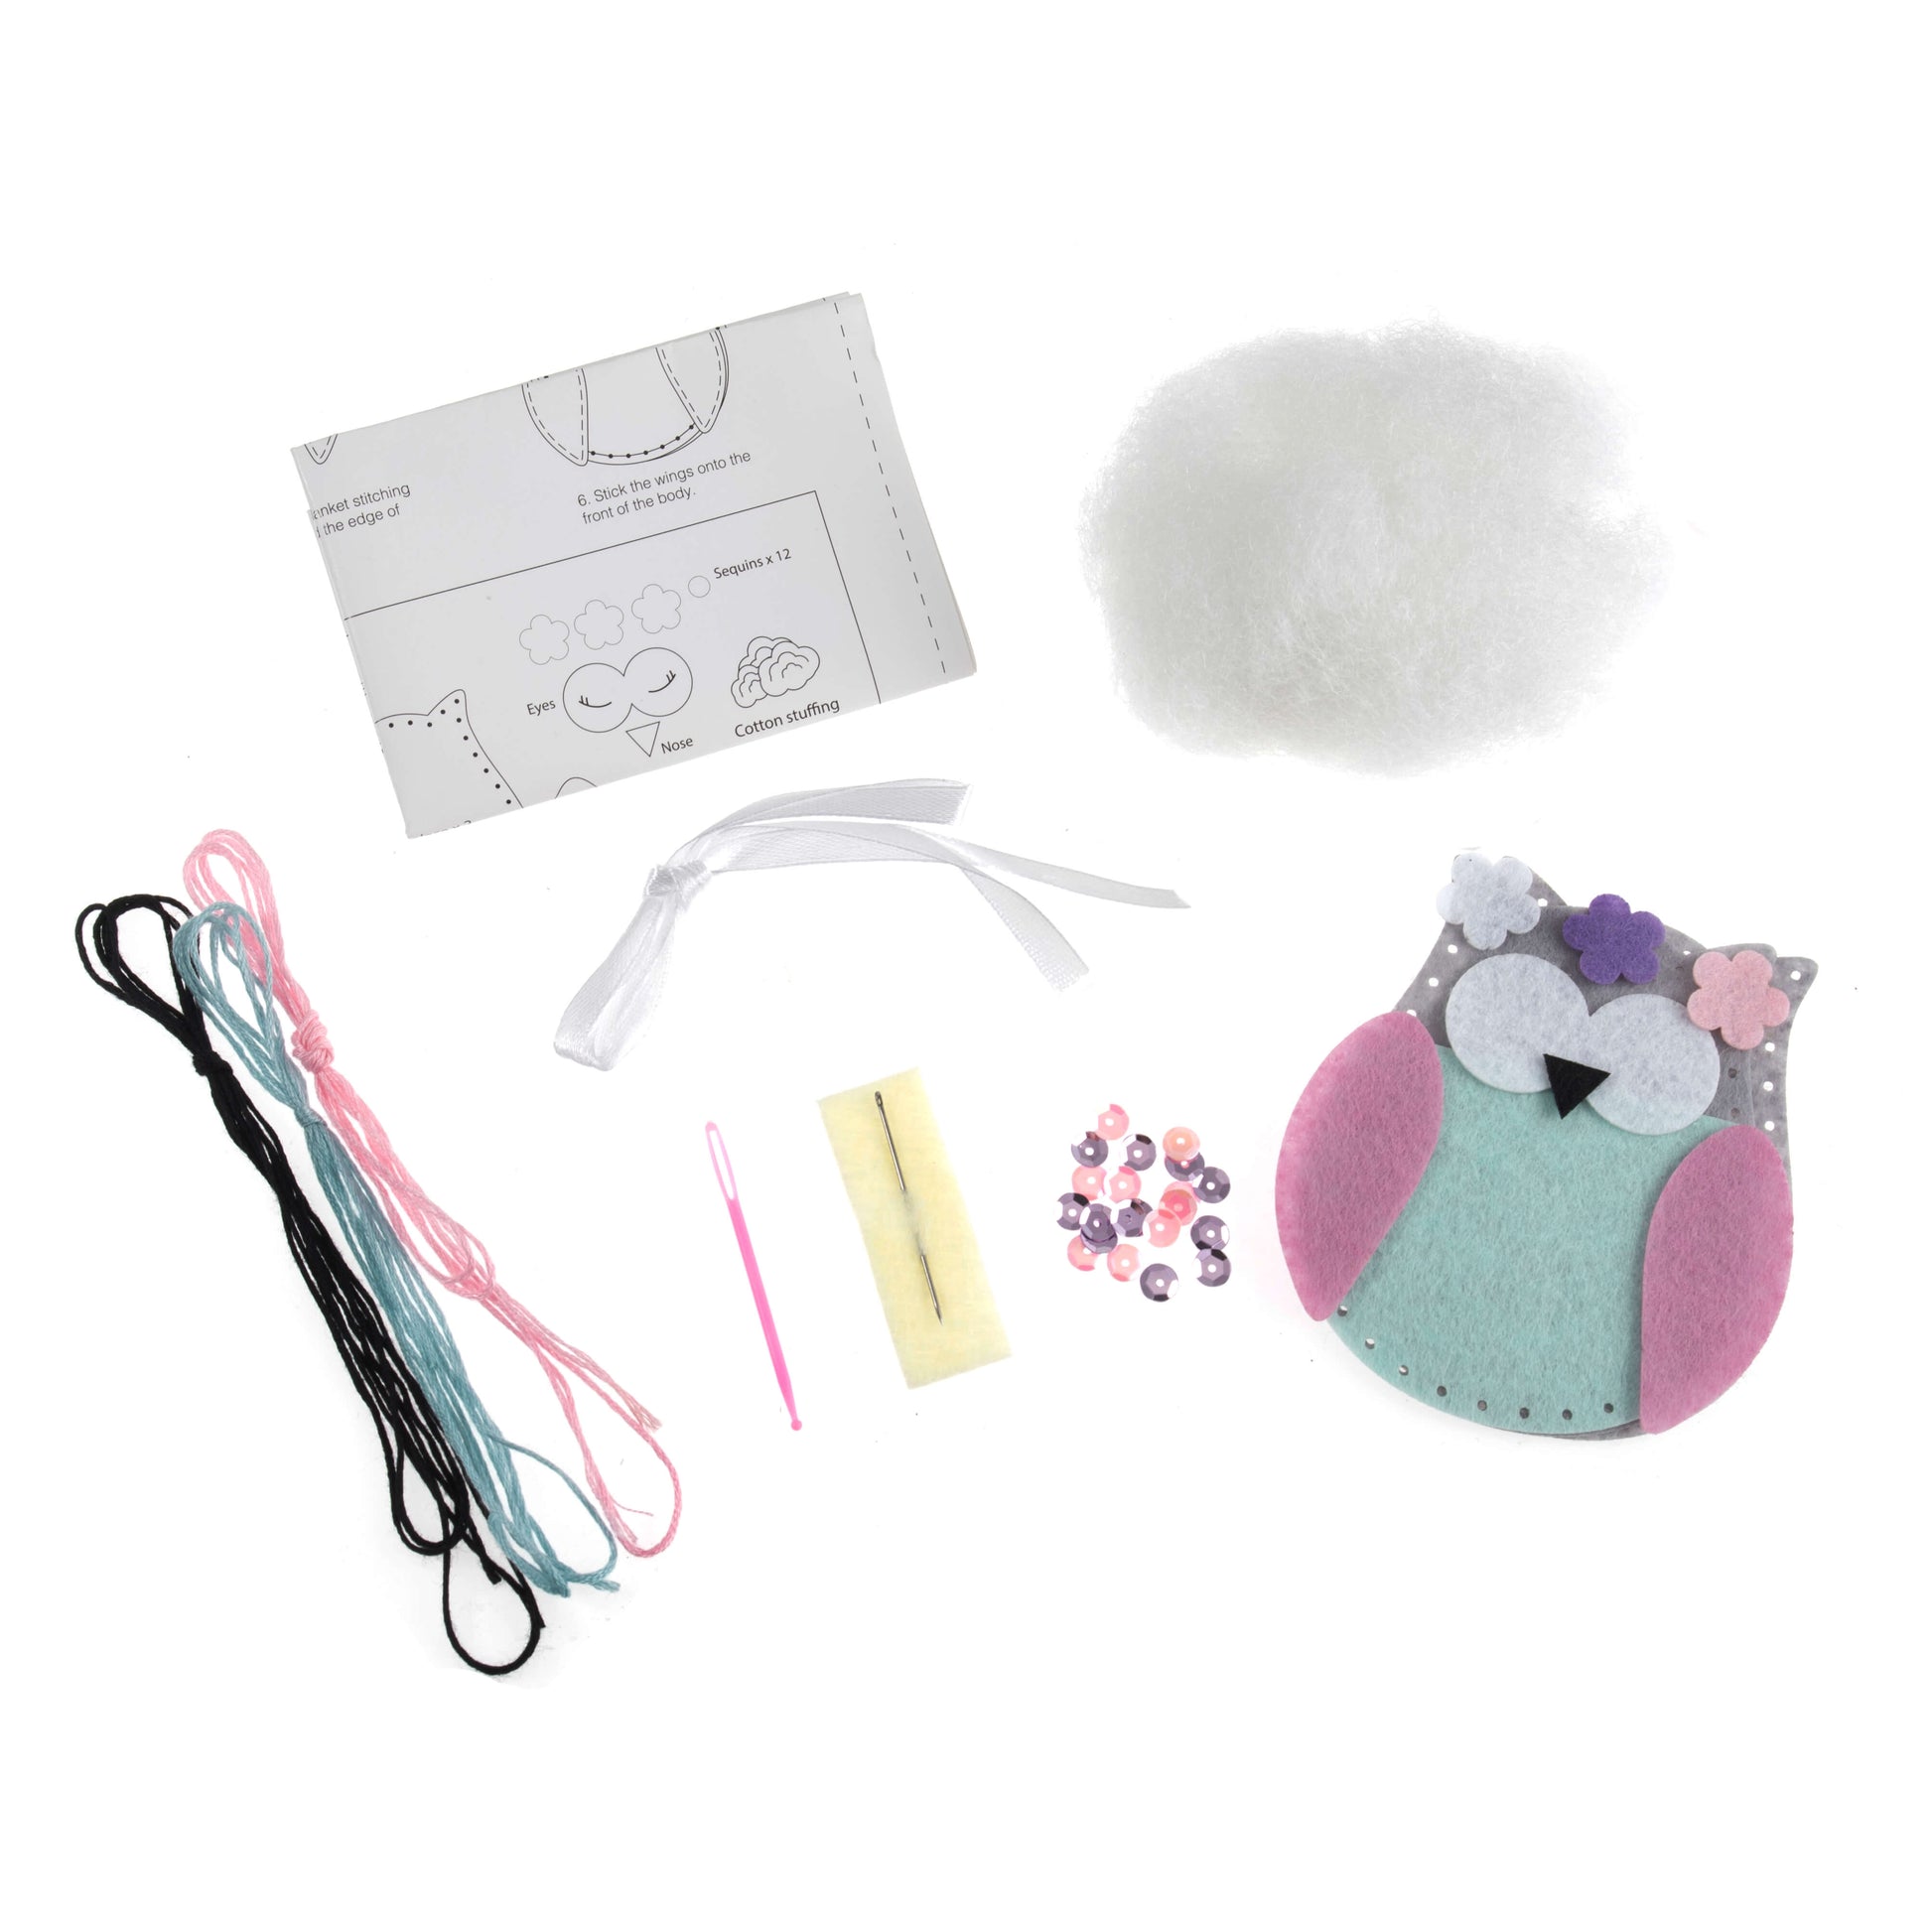 A photo of a kit to make a felt owl, with the owl partially assembled and instructions visible.